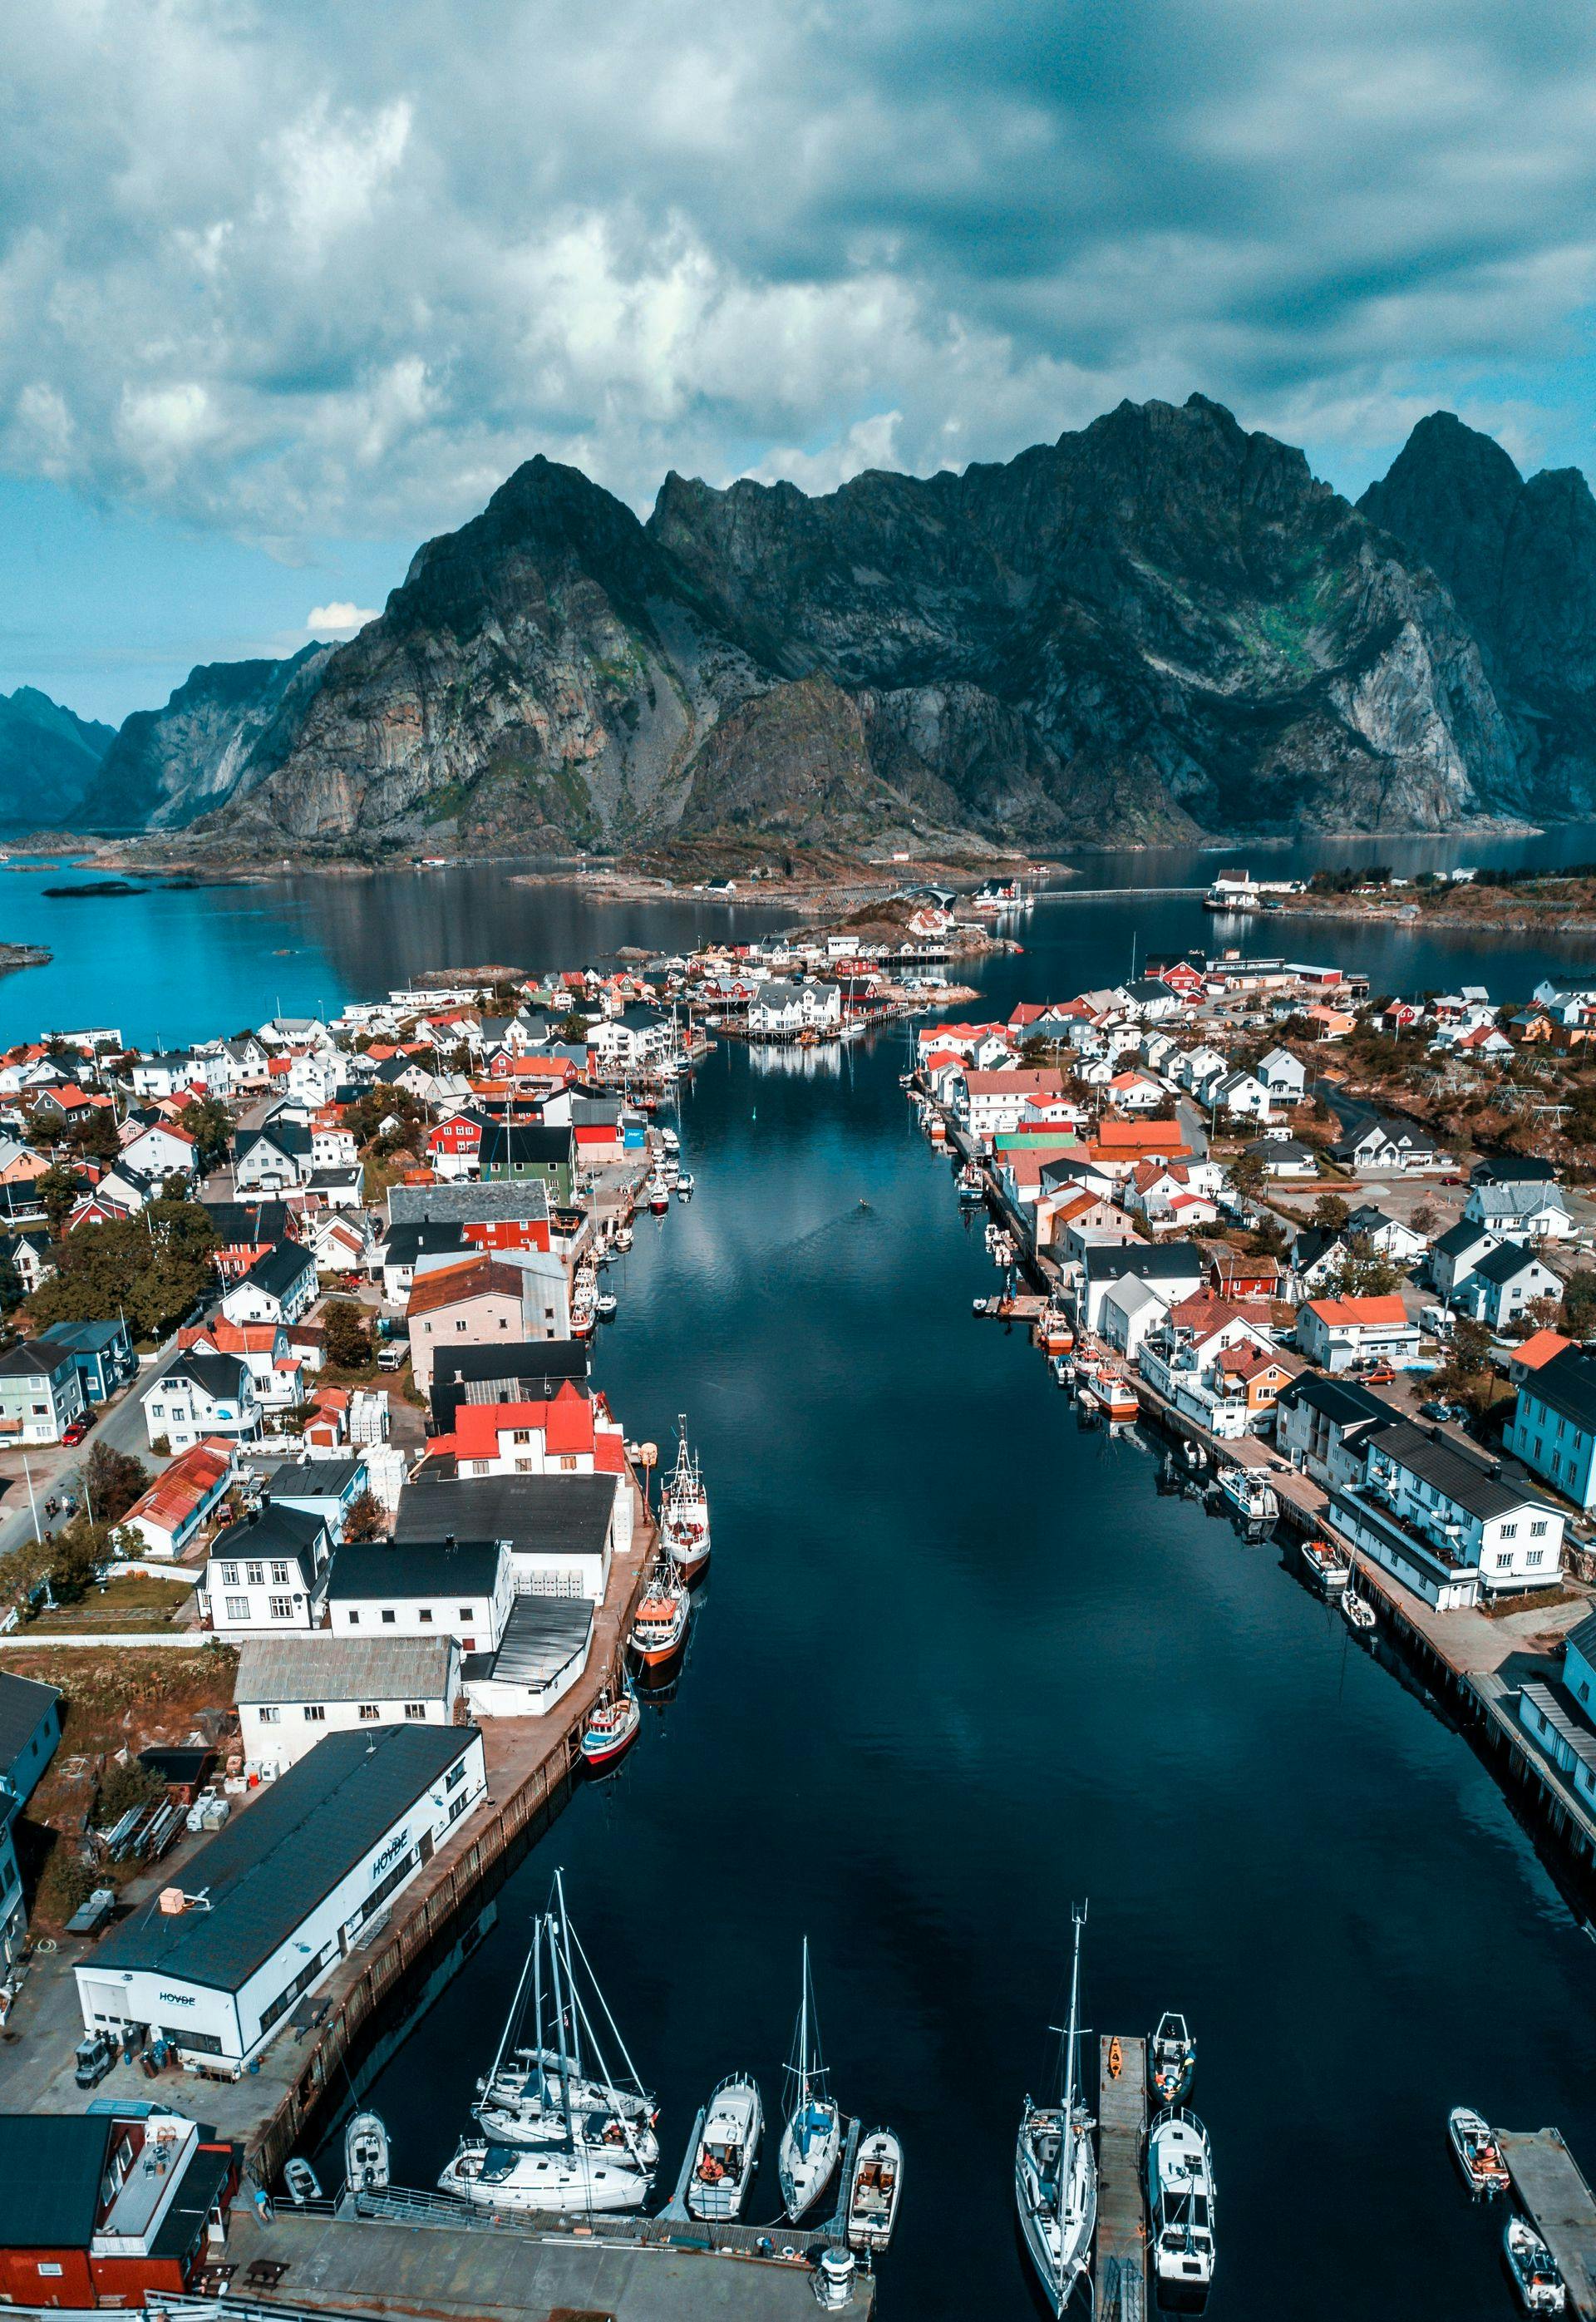 Coworking, Coliving and Surfing in Lofoten (Norway)